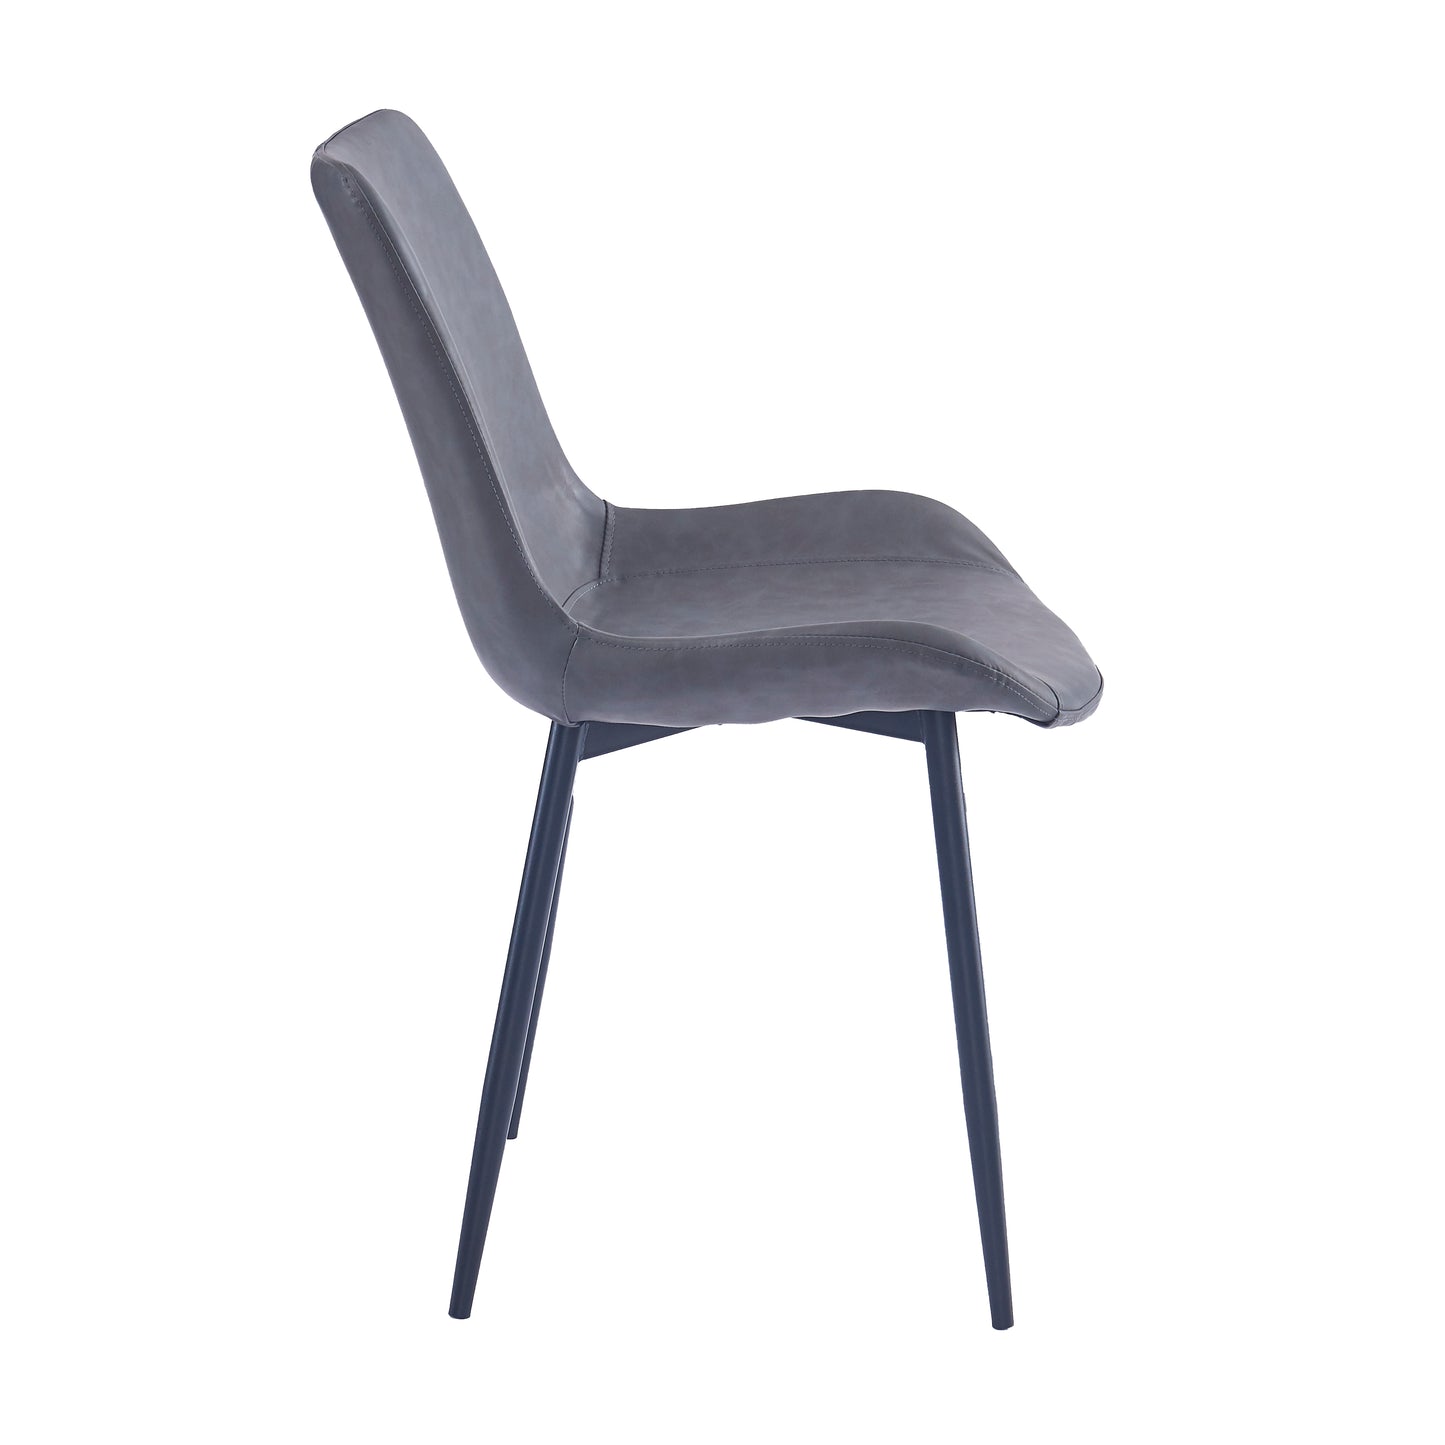 Criterion Apollo Dining Chair 830mm PU Leather Cushioned Seat, Carbon Steel Frame Grey